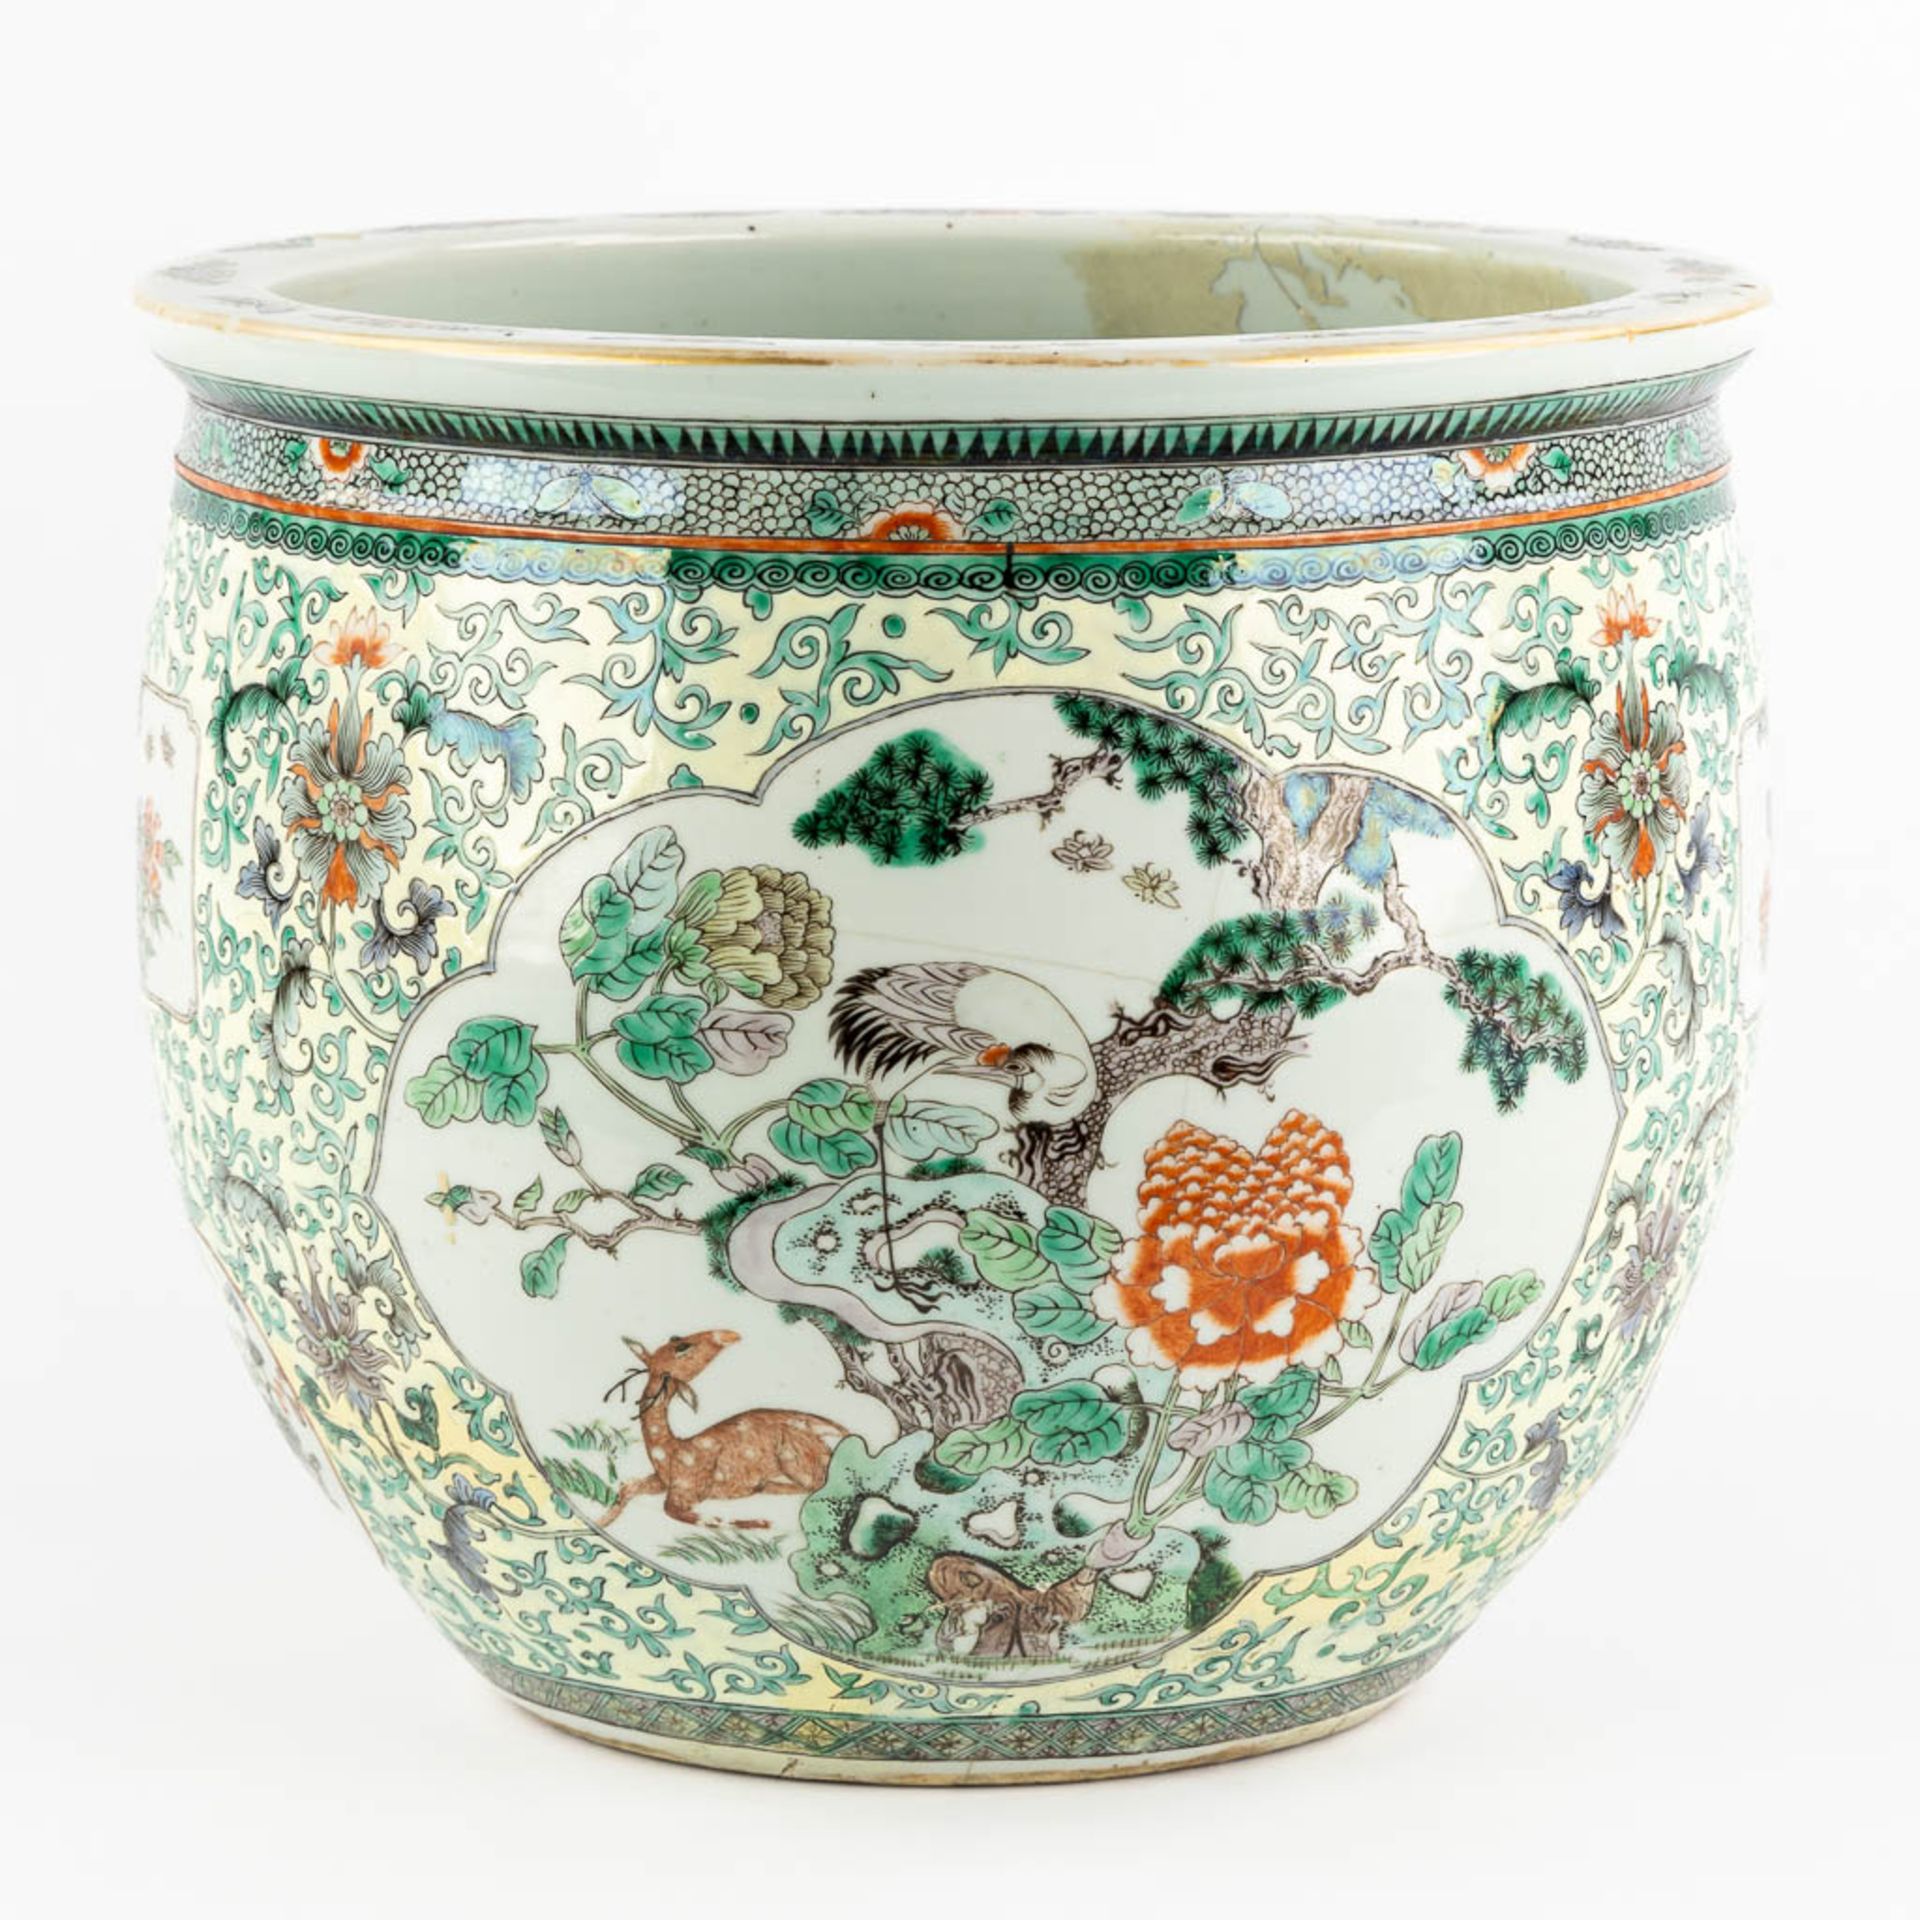 A Large Chinese Cache-Pot, Famille Verte decorated with fauna and flora. 19th C. (H:35 x D:40 cm) - Image 6 of 14